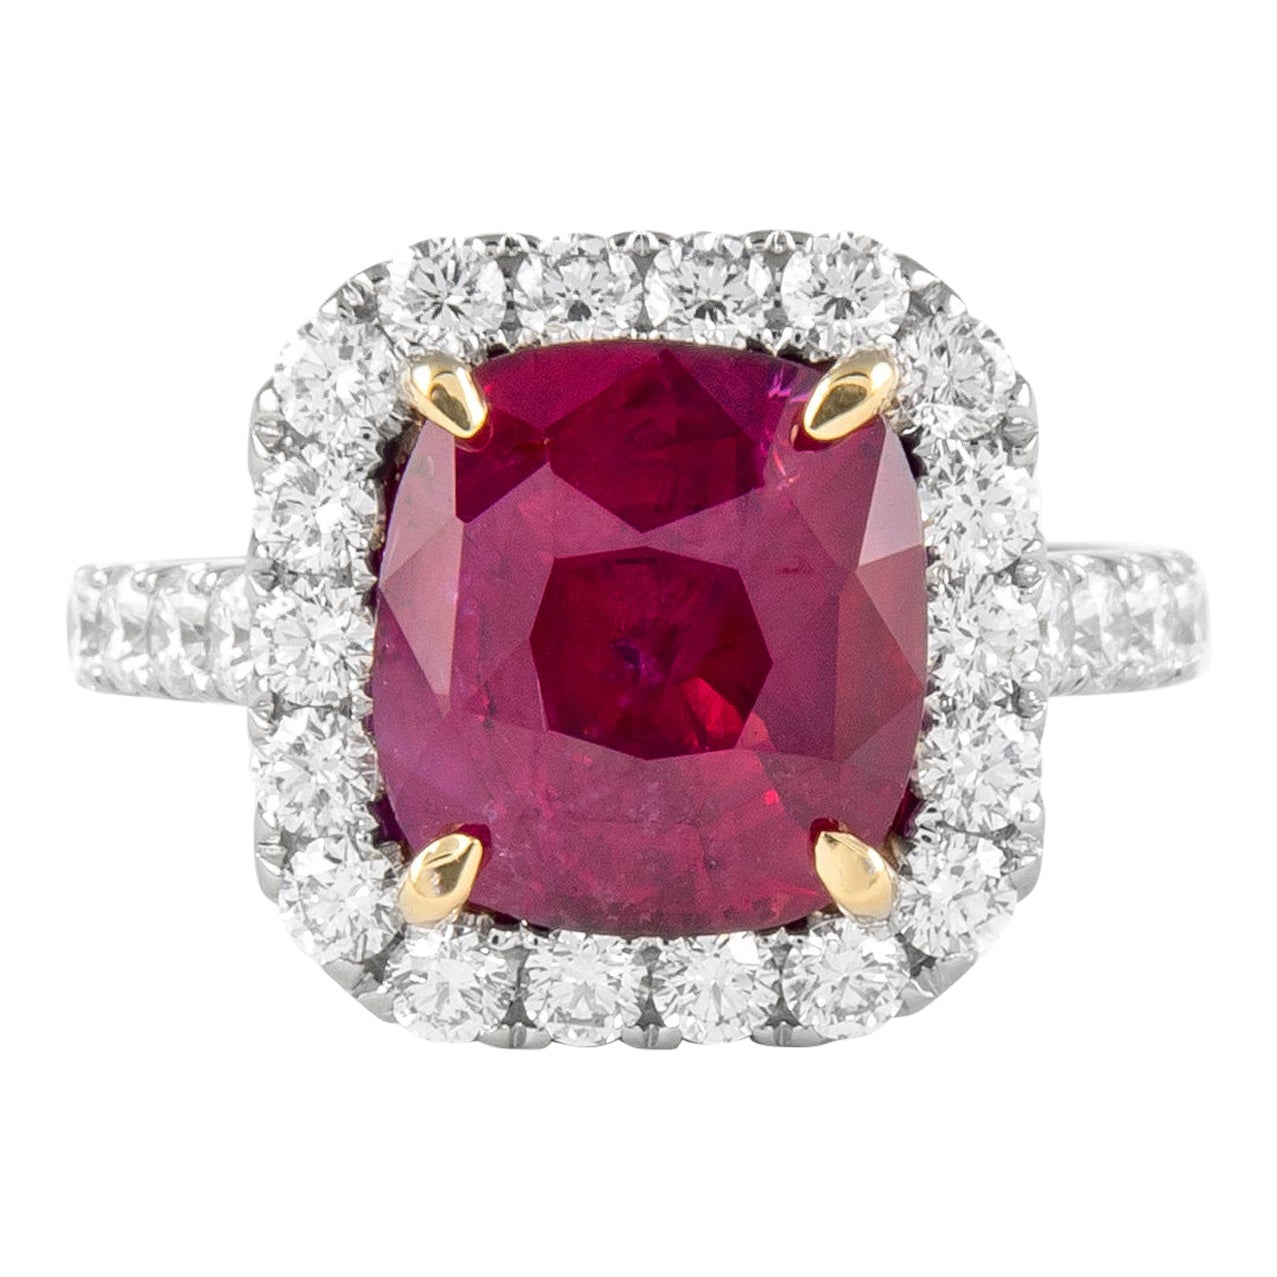 Alexander GIA Certified 5.24ct No Heat Ruby with Diamonds Ring 18k Two Tone Gold